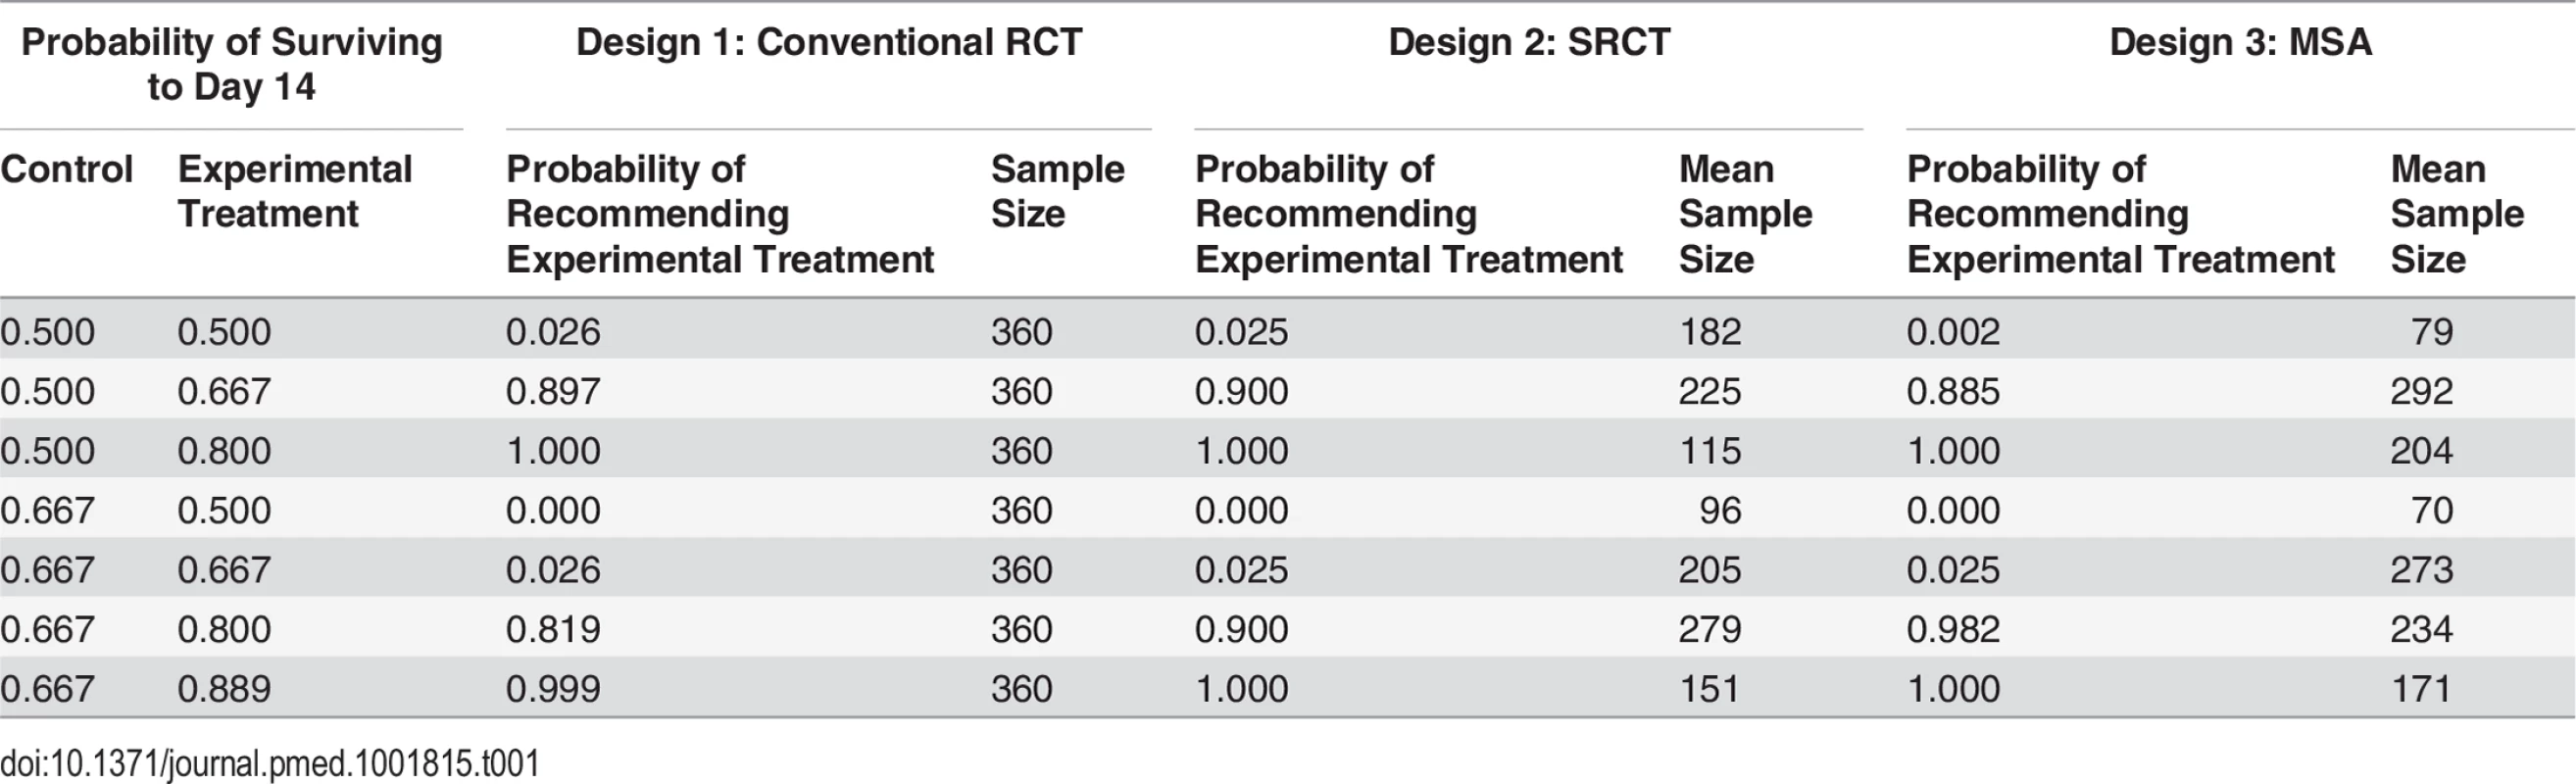 Probabilities of recommending treatment and mean sample size for the three different study designs for various combinations of survival rates.